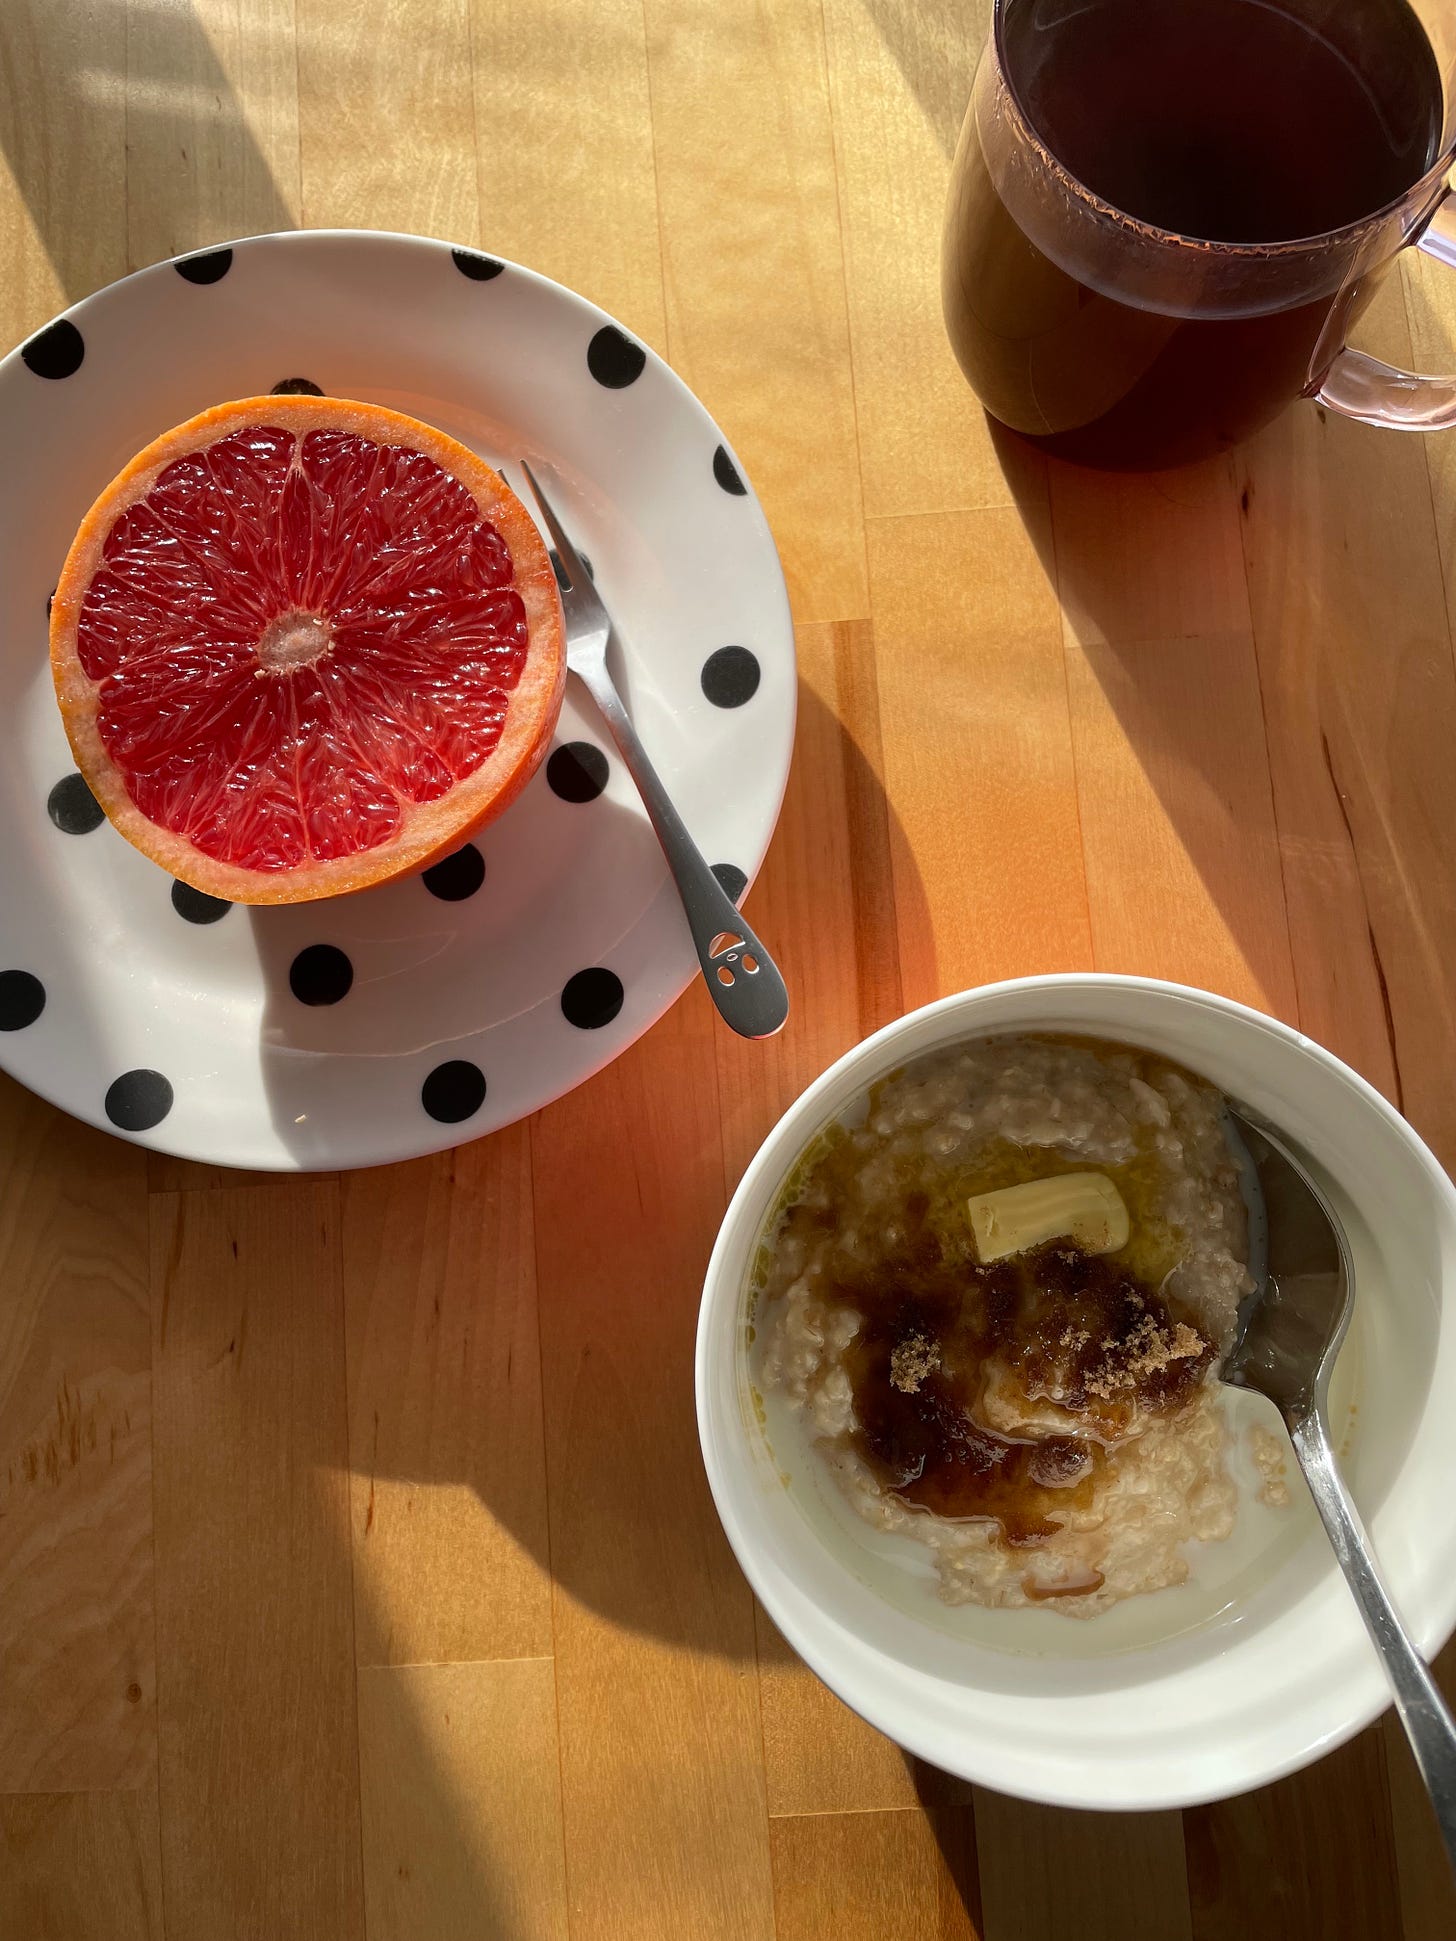 Breakfast table with a bowl of oats topped with butter and brown sugar. A red grapefruit half sits on a spotty plate nearby, with a cup of filter coffee in a translucent pink mug.